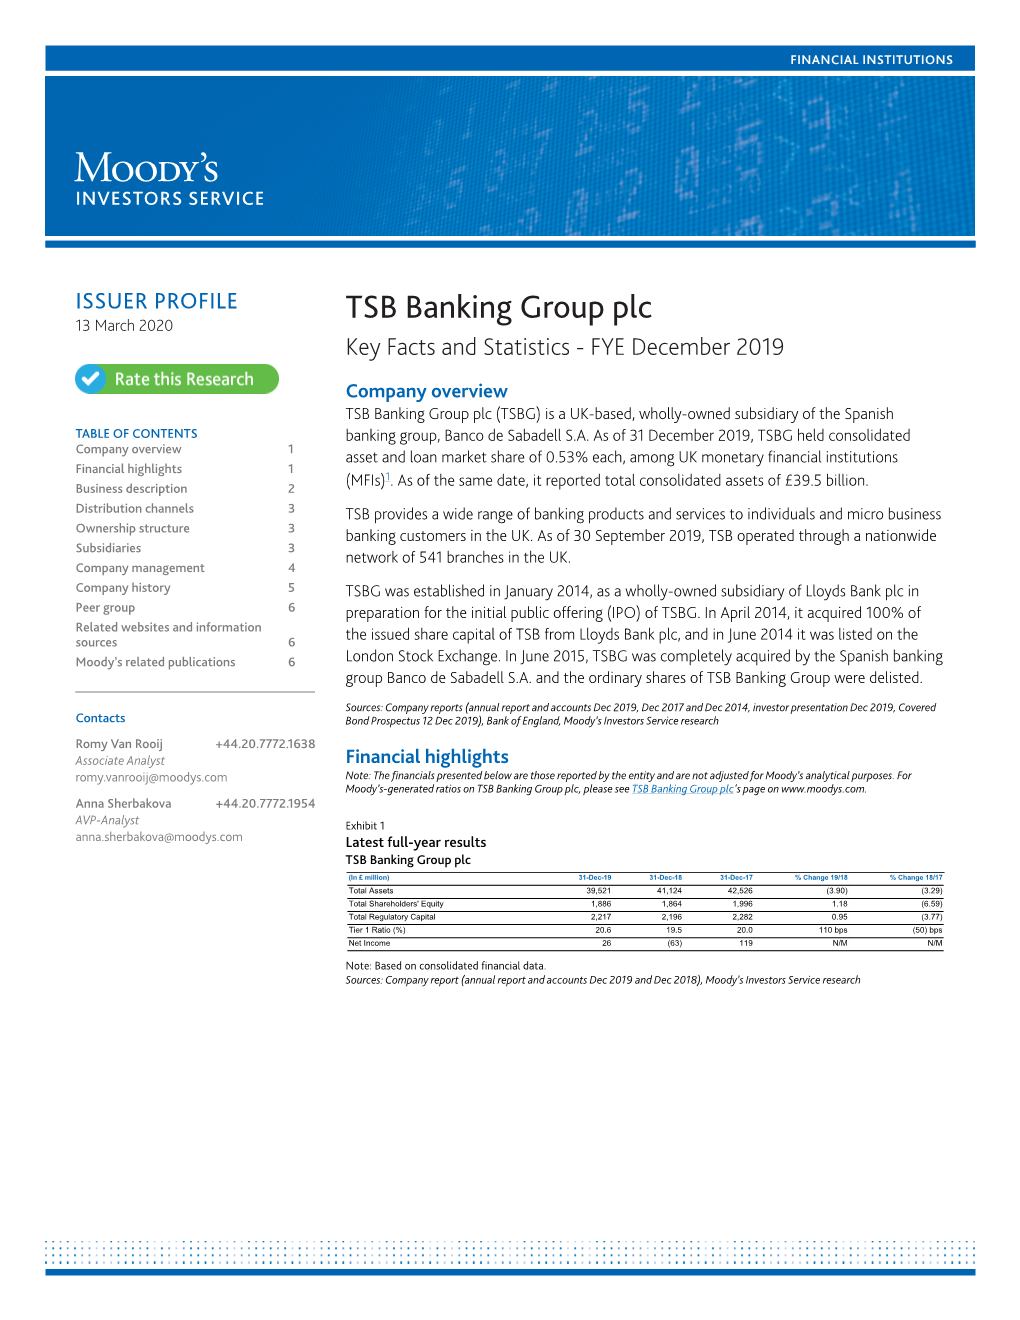 TSB Banking Group Plc 13 March 2020 Key Facts and Statistics - FYE December 2019